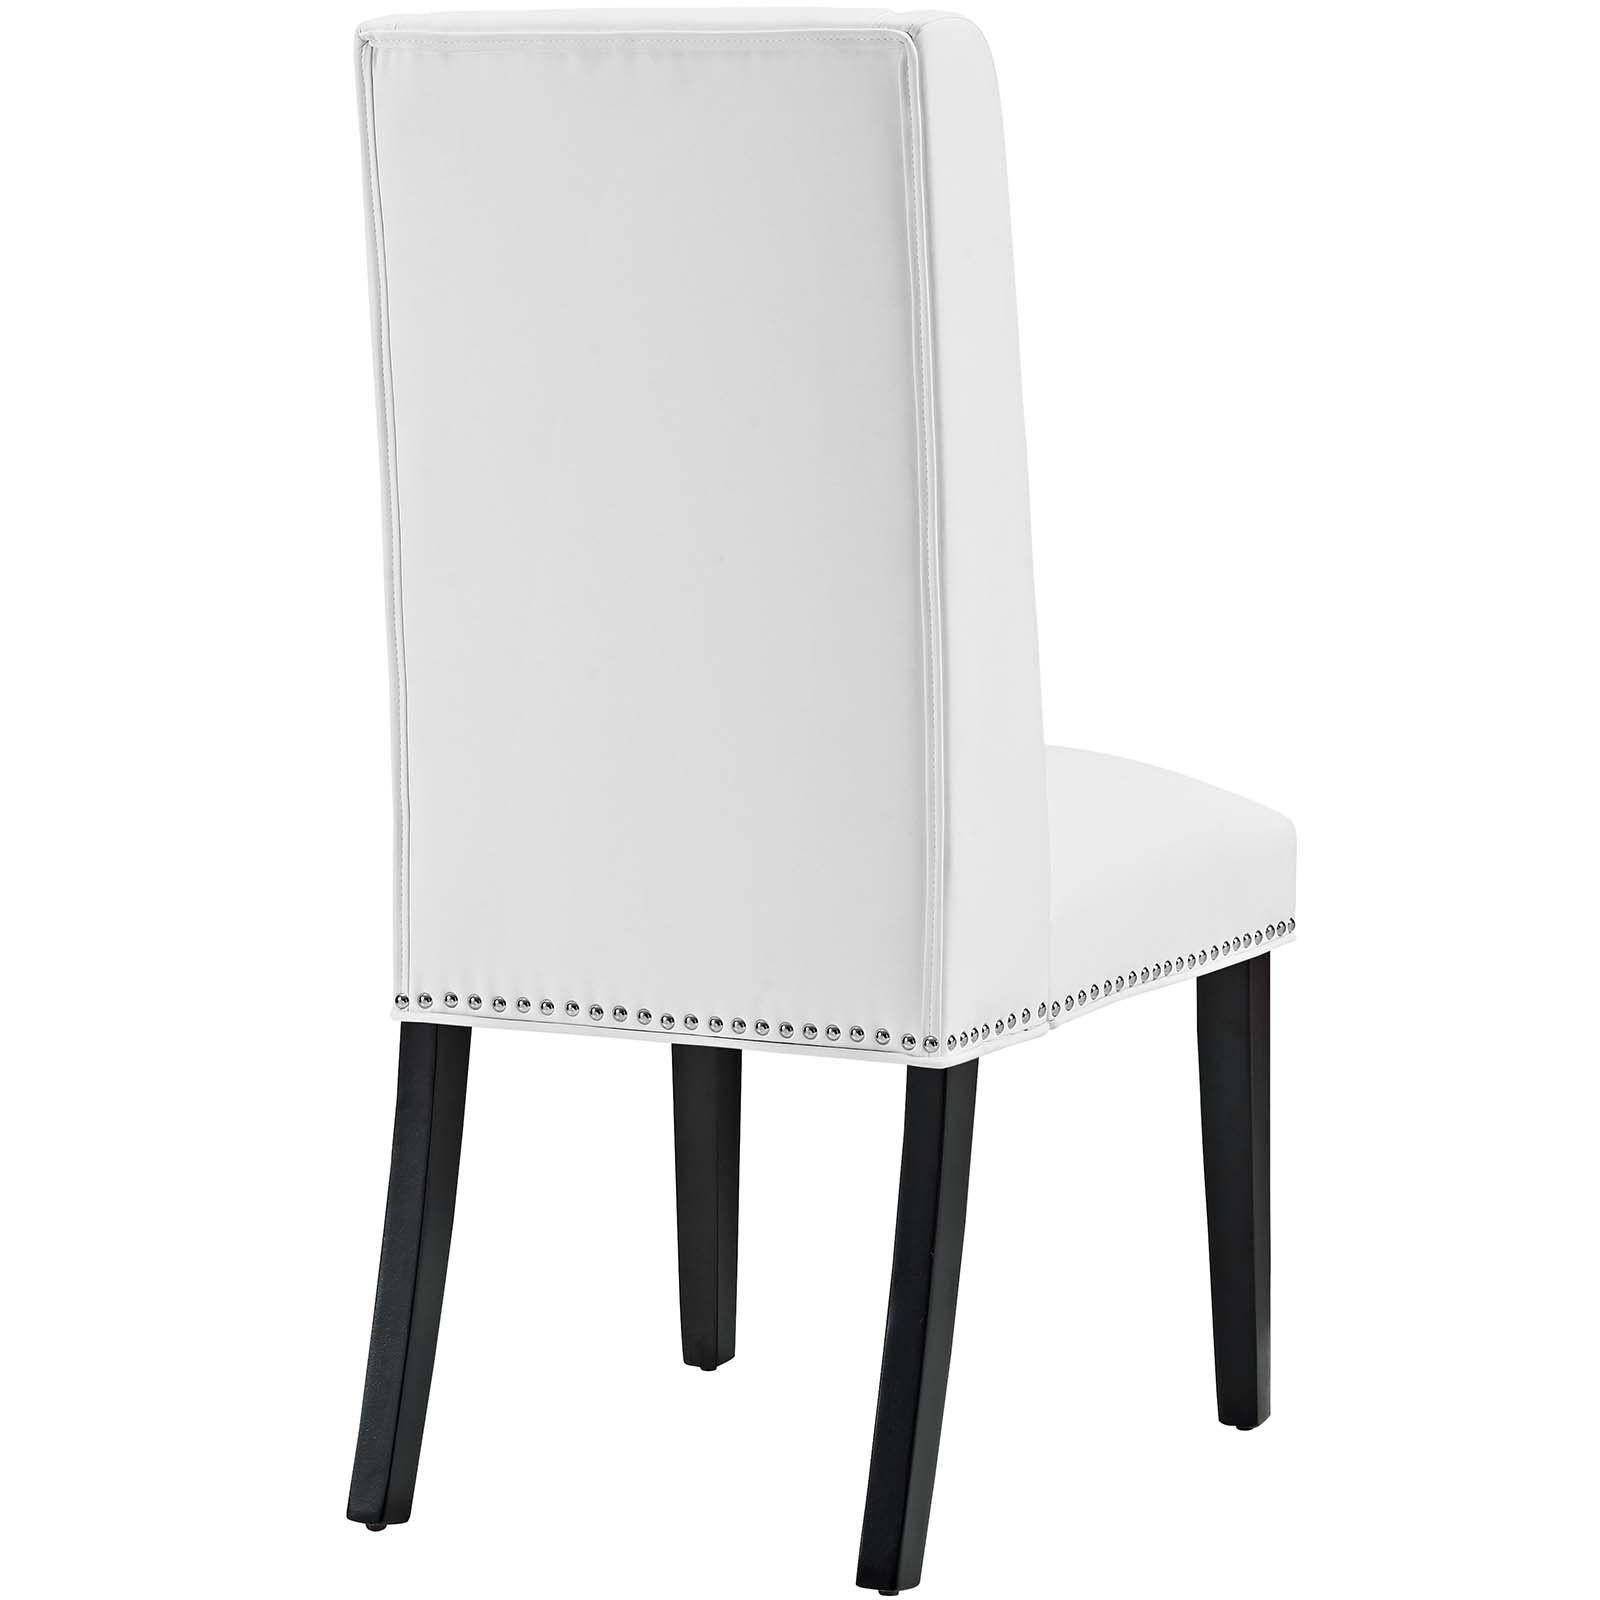 Modway Baron Modern Tall Back Wood Faux Leather Upholstered Two Dining Chairs in White